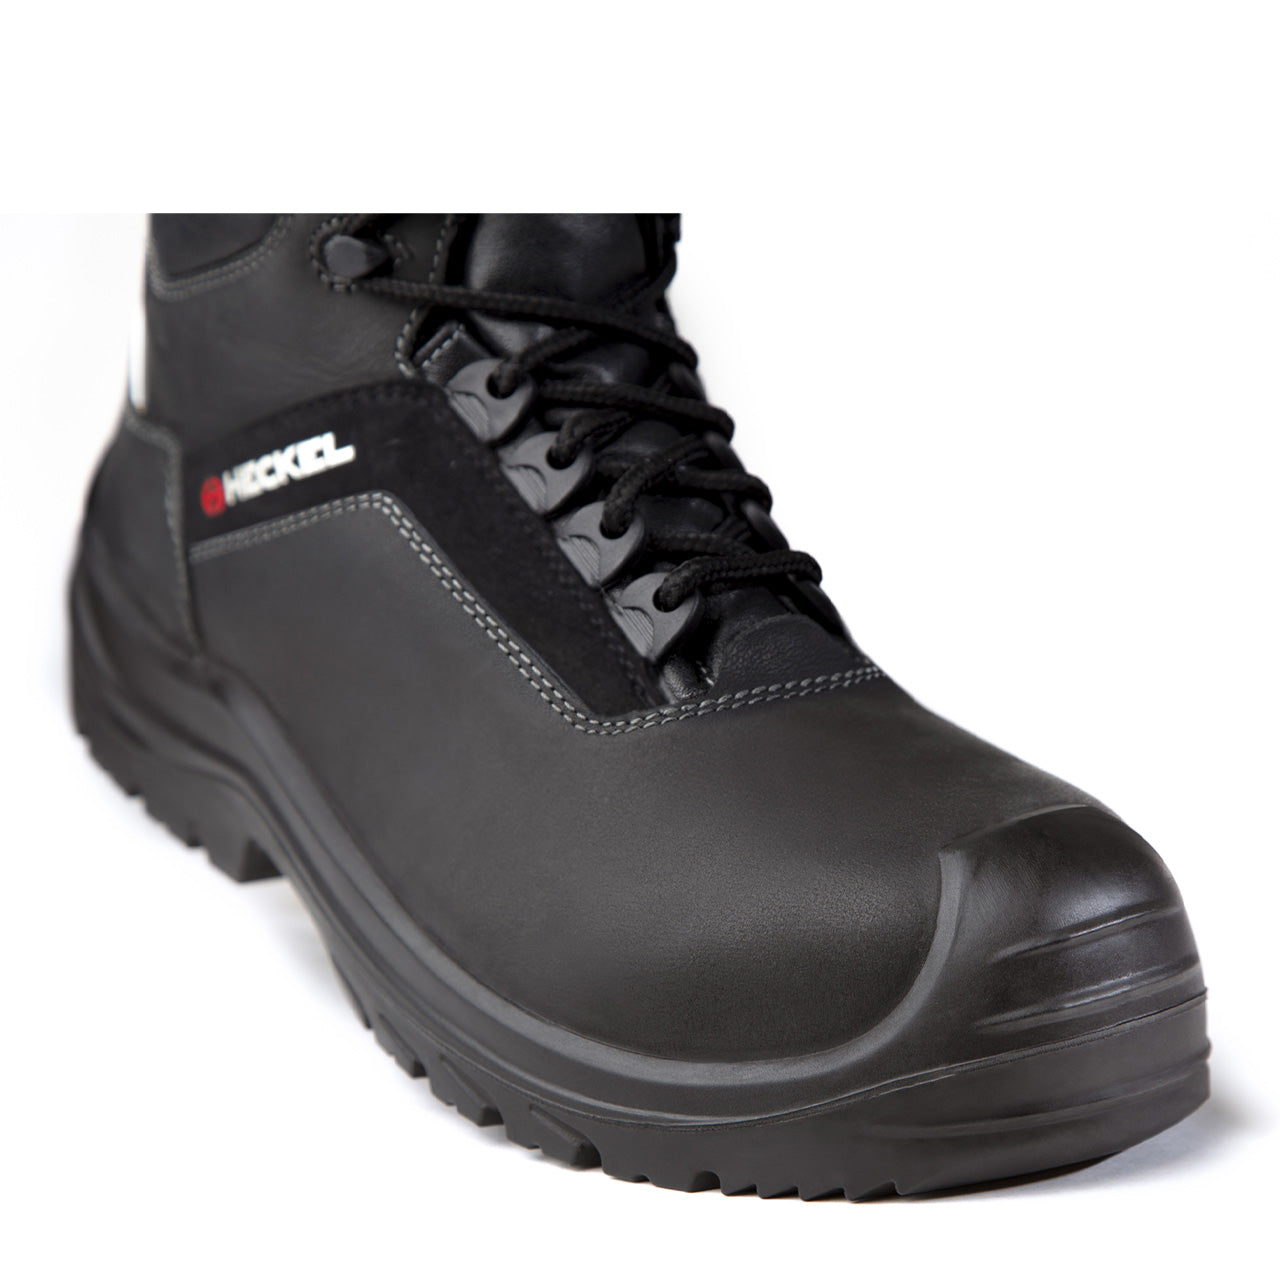 Heckel Suxxeed Offroad High Boots Black. Safety Work Boots S3 SRC. Detail View. protexU